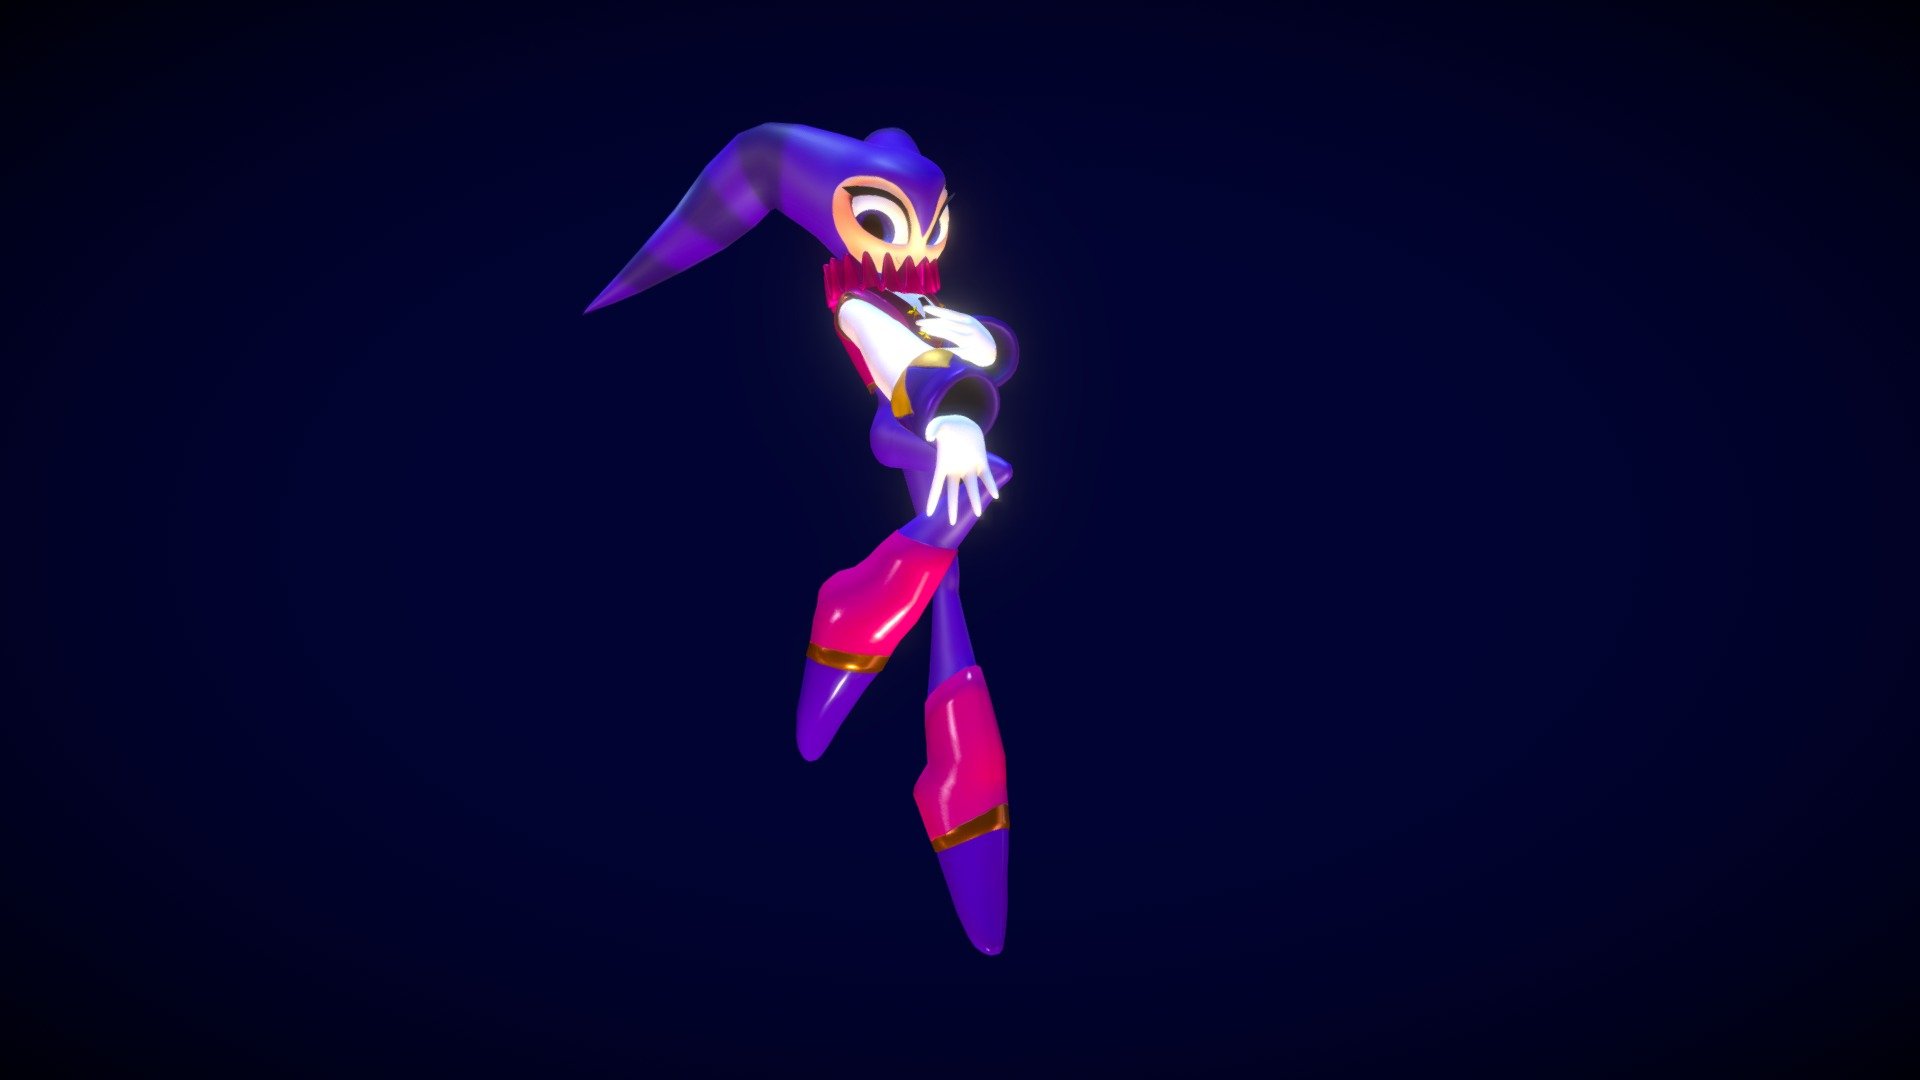 NiGHTS into Dreams is one of my very favorite little games!
I love NiGHTS as a character so much, they're really fun to animate! 

I had an awful time getting sketchfab to have the correct skinning once this model was uploaded, so it still has some errors. If anyone knows a way to fix this please let me know!  I used blender for modeling, rigging, and animation 3d model